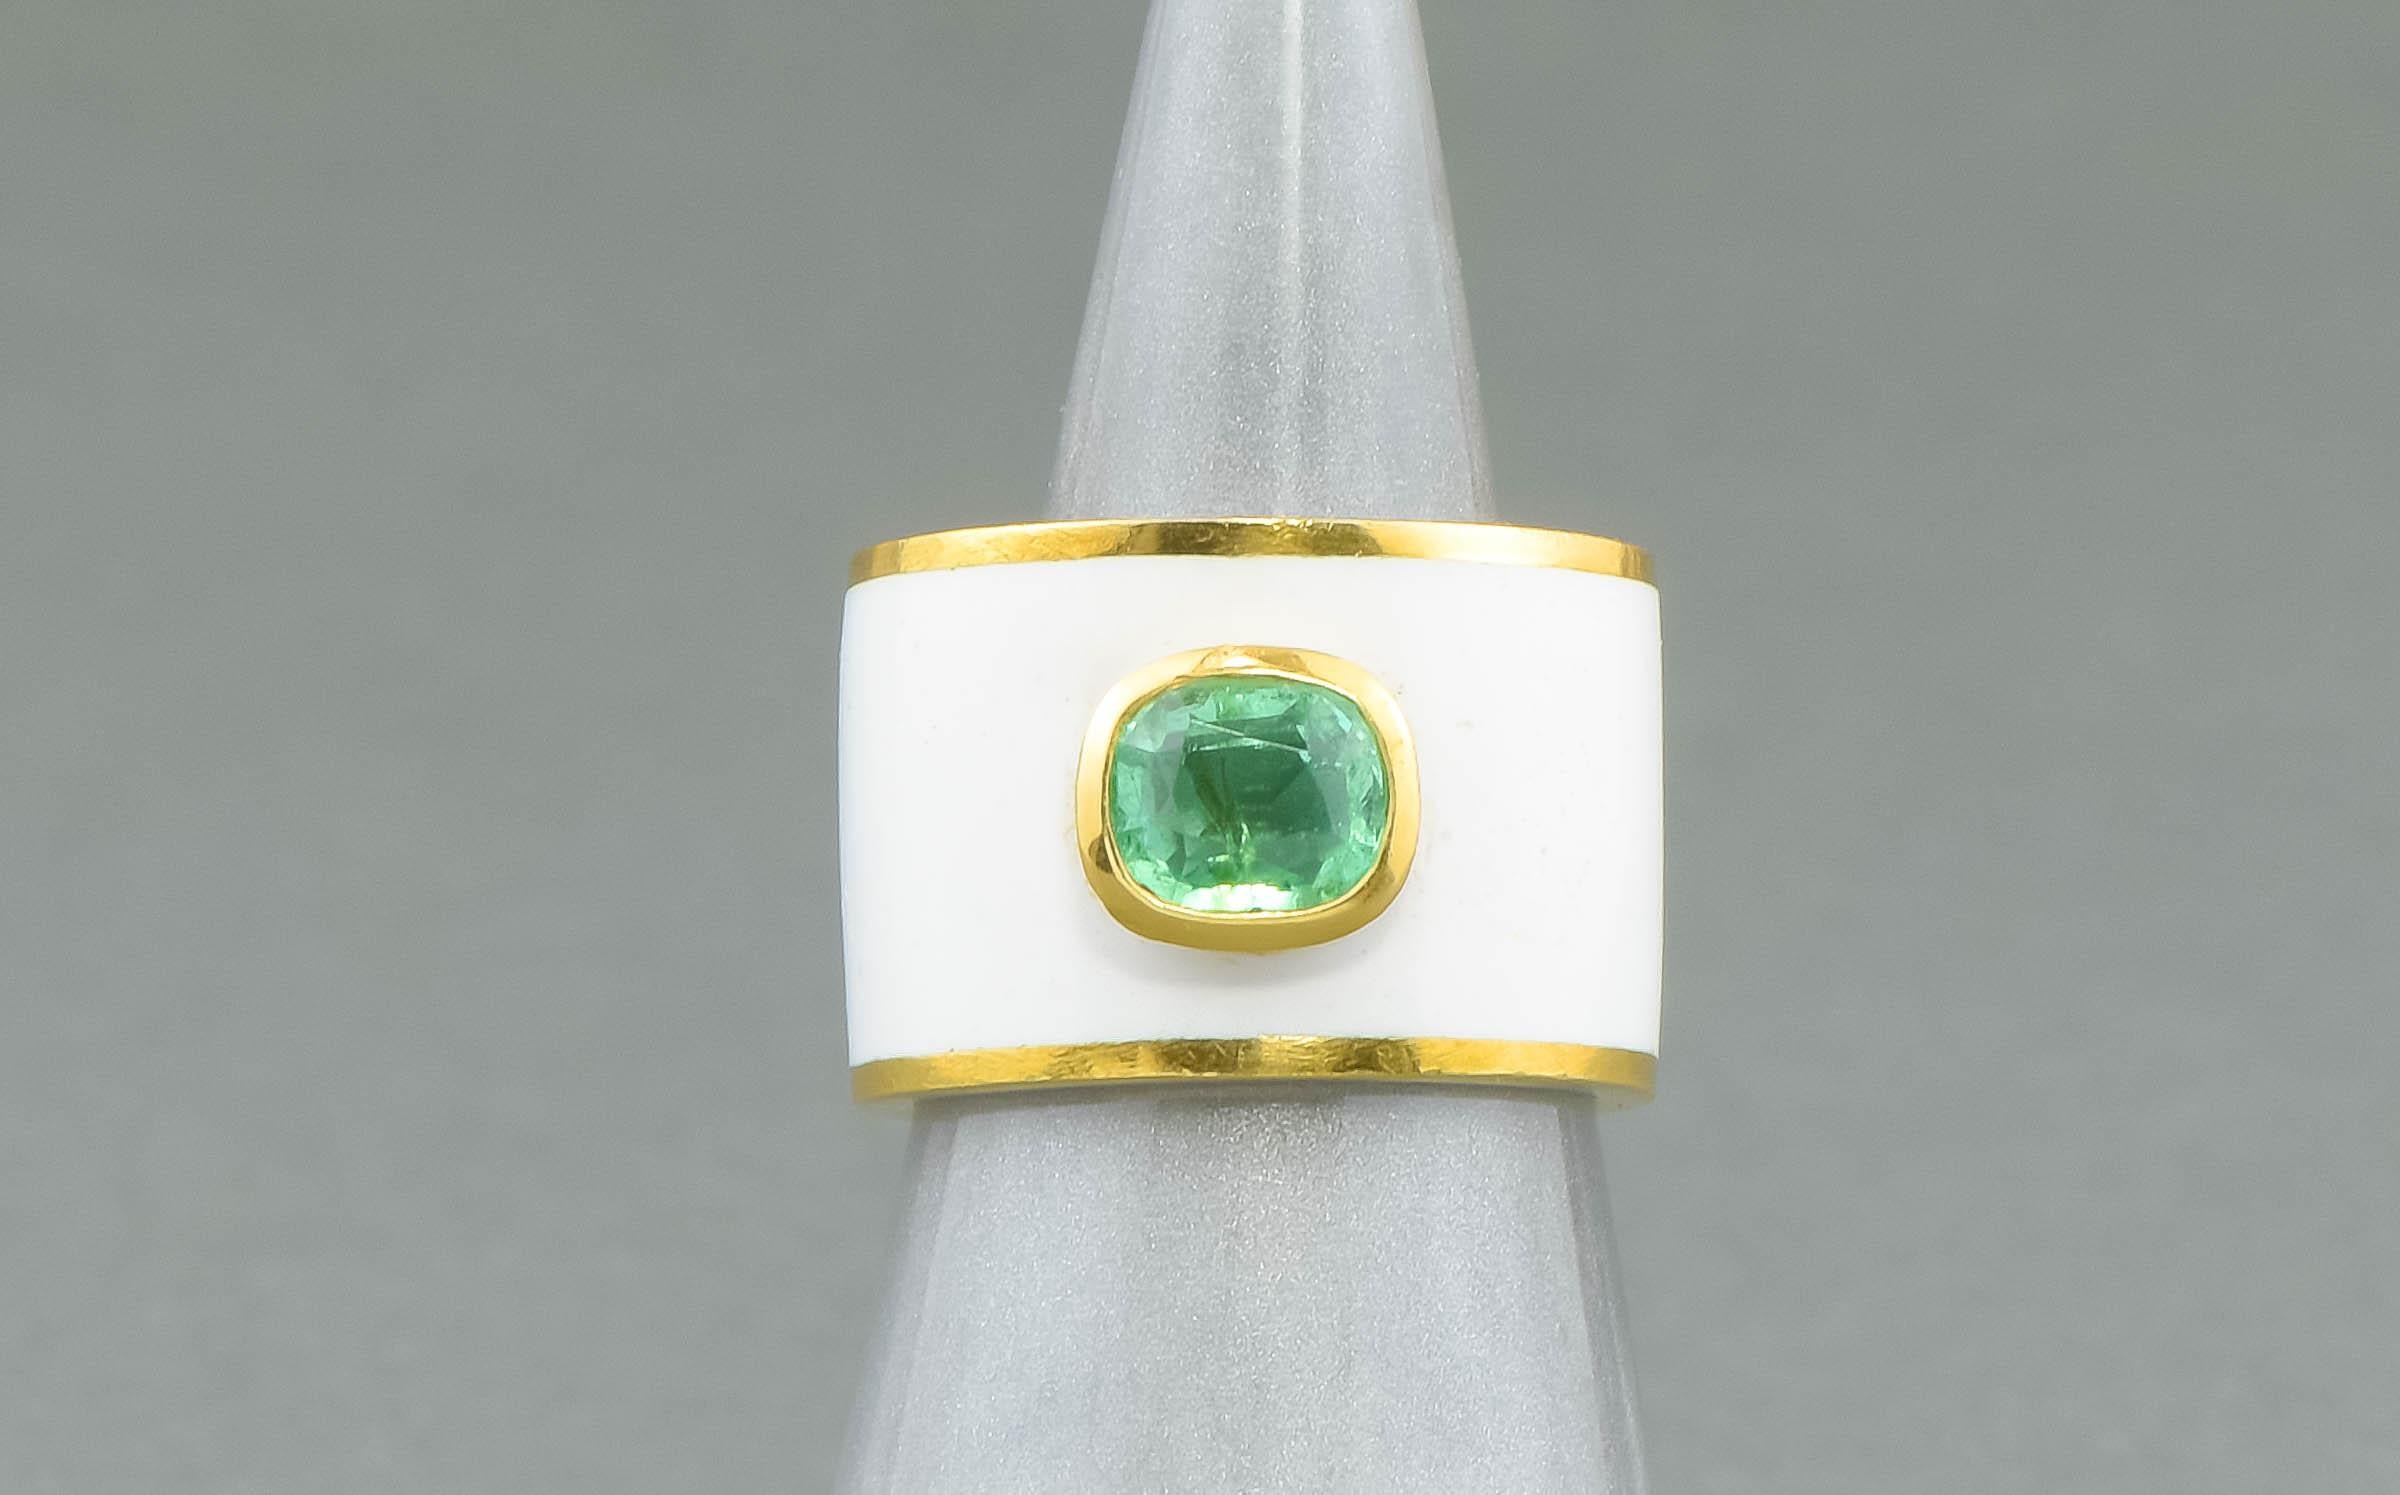 Crafted of buttery solid yellow gold marked as 14K but testing a bit higher for me, this unusual ring features a cushion shaped emerald bezel-set atop a wide and heavy enameled band. The bright spring green of the emerald absolutely 